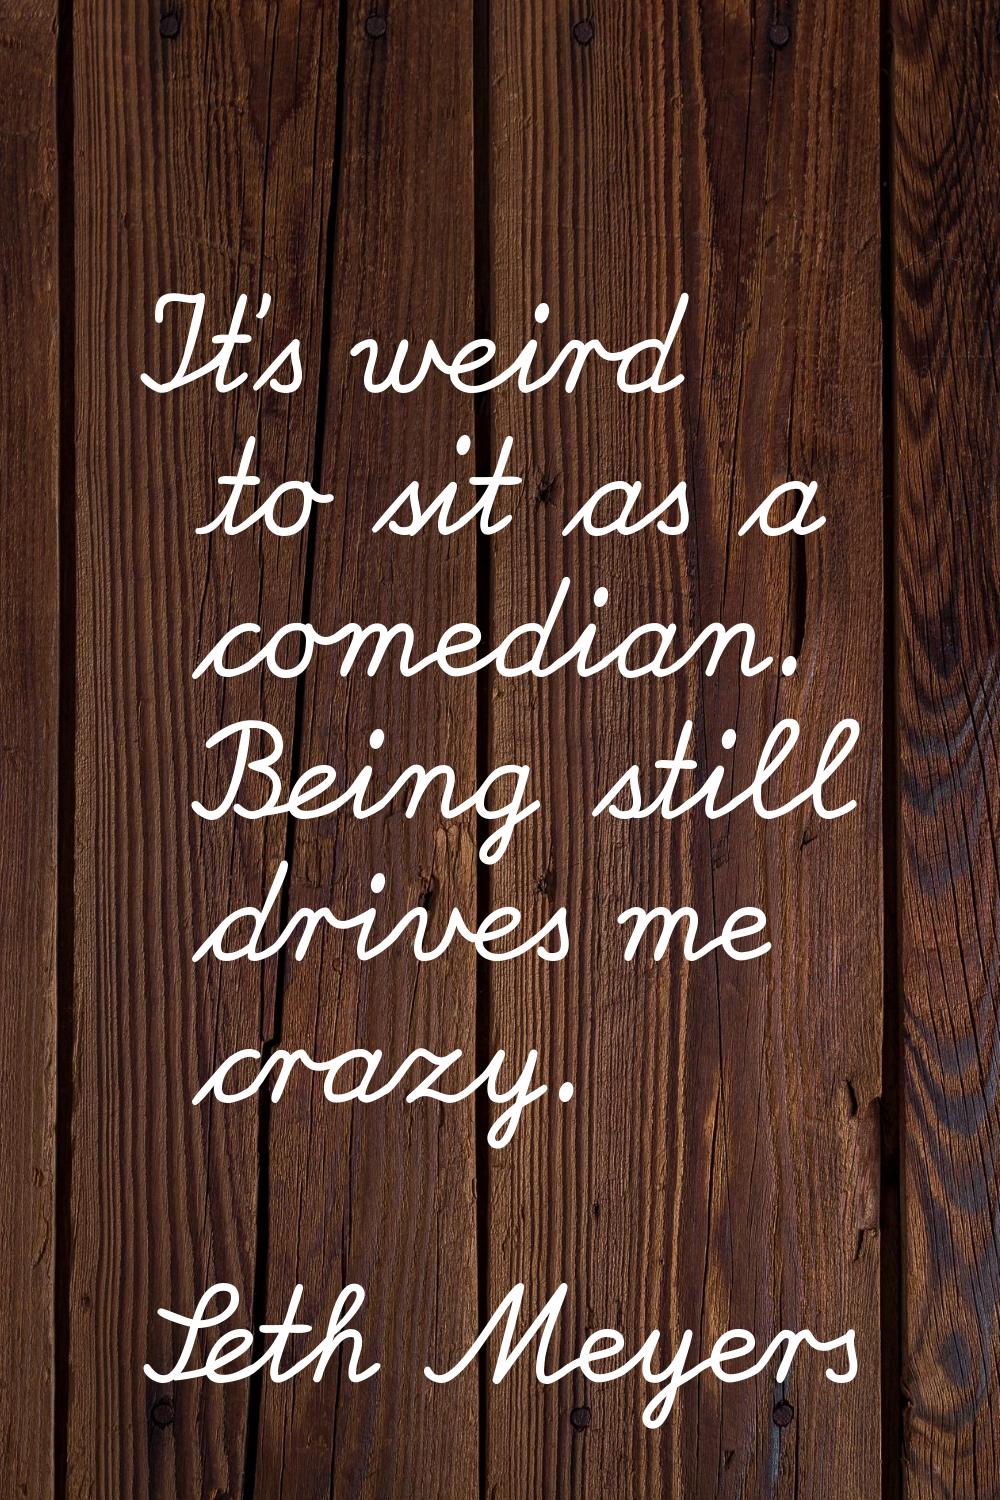 It's weird to sit as a comedian. Being still drives me crazy.